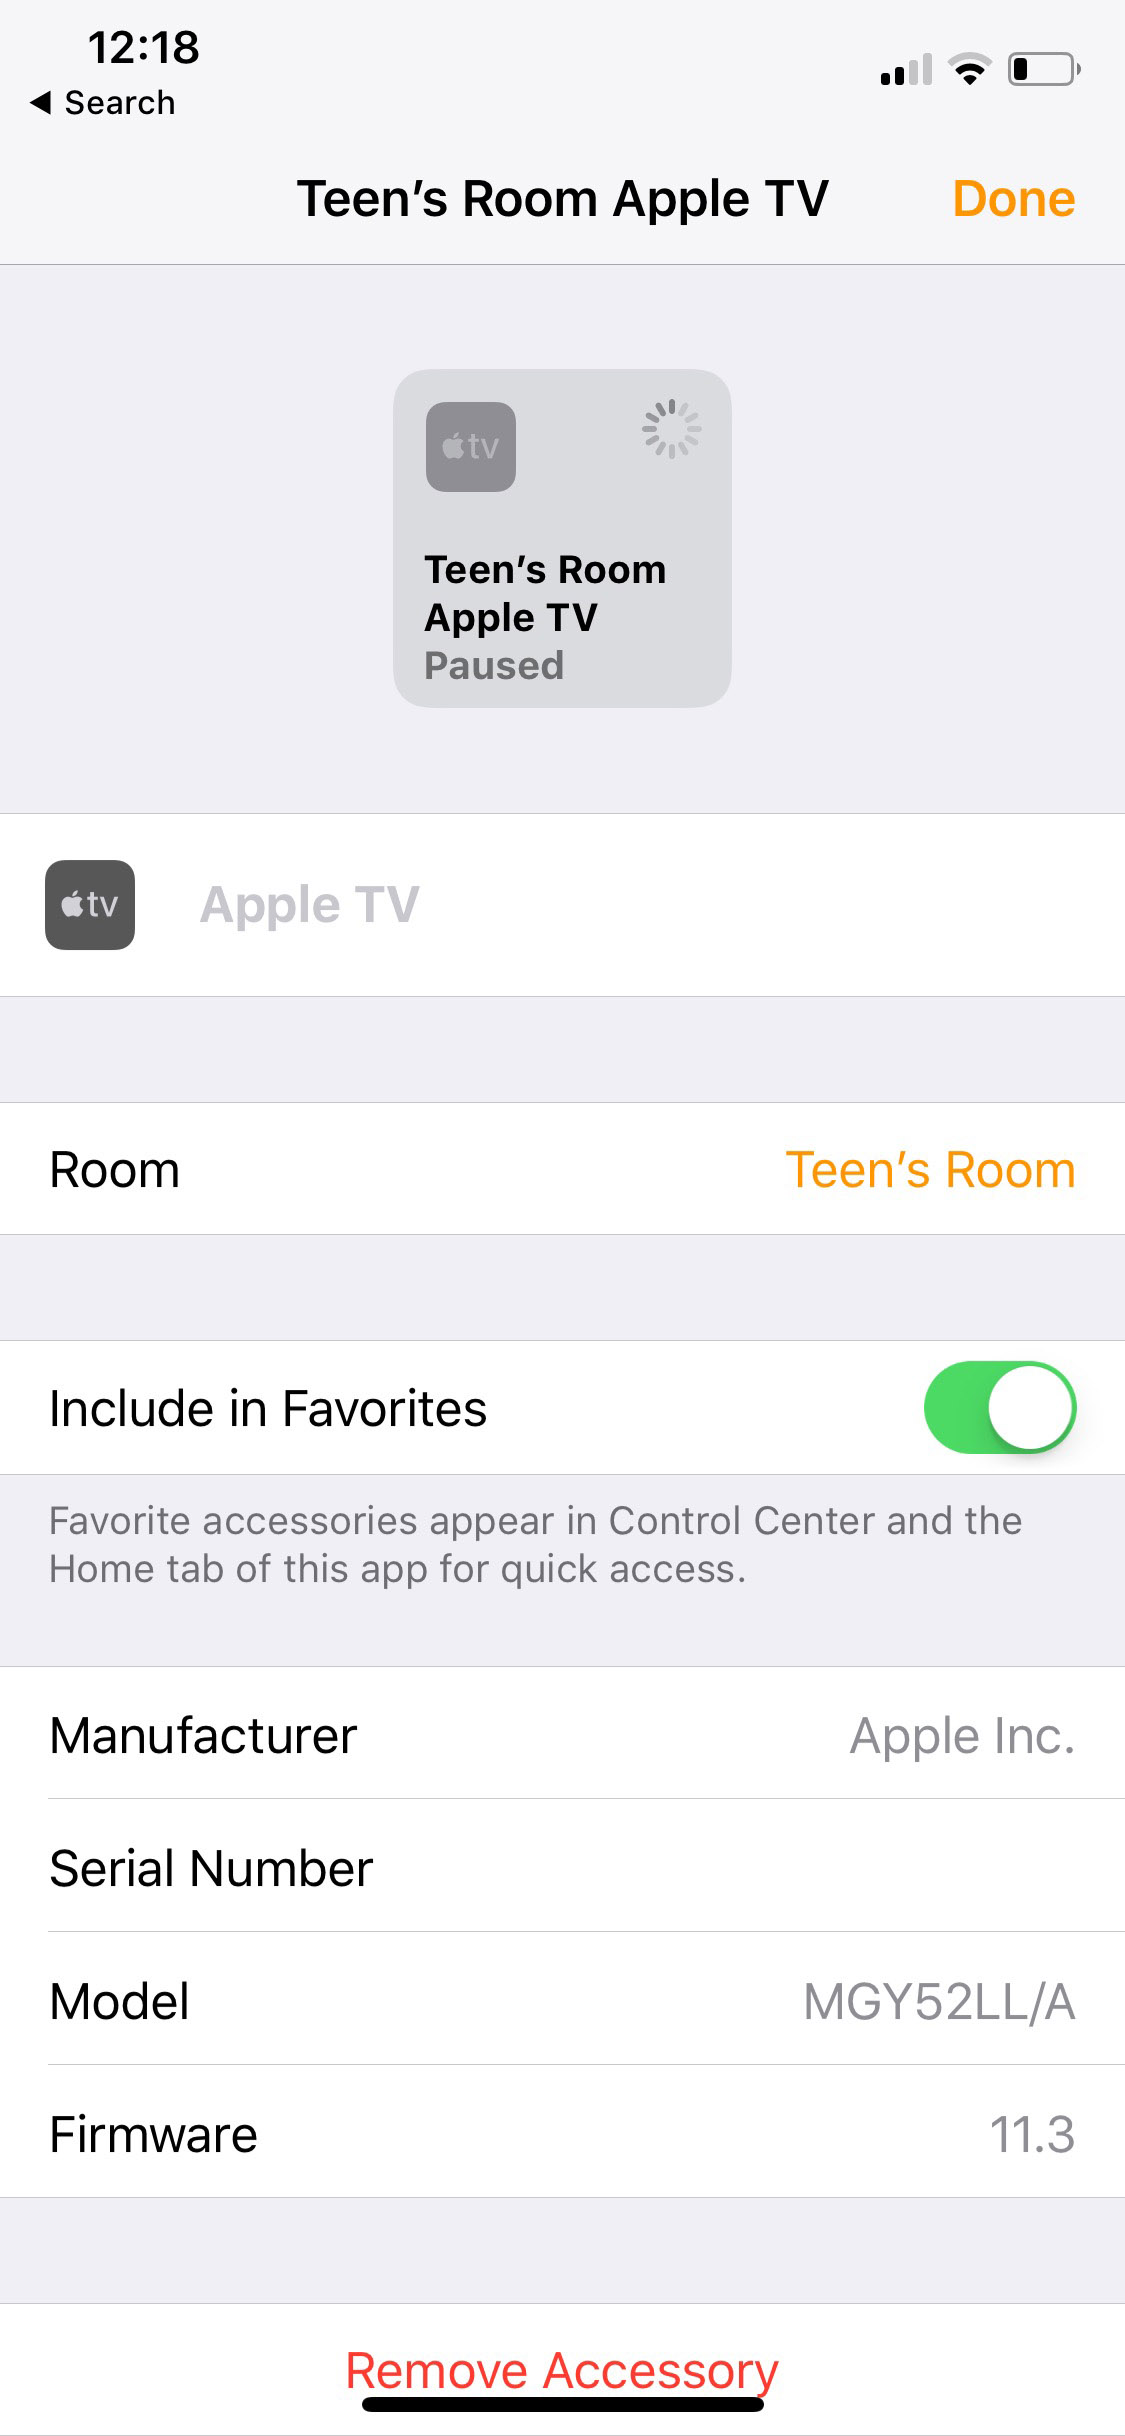 AirPlay 2 With Multi-Room Audio Streaming Arrives in iOS 11.3 Beta and tvOS 11.3 Beta